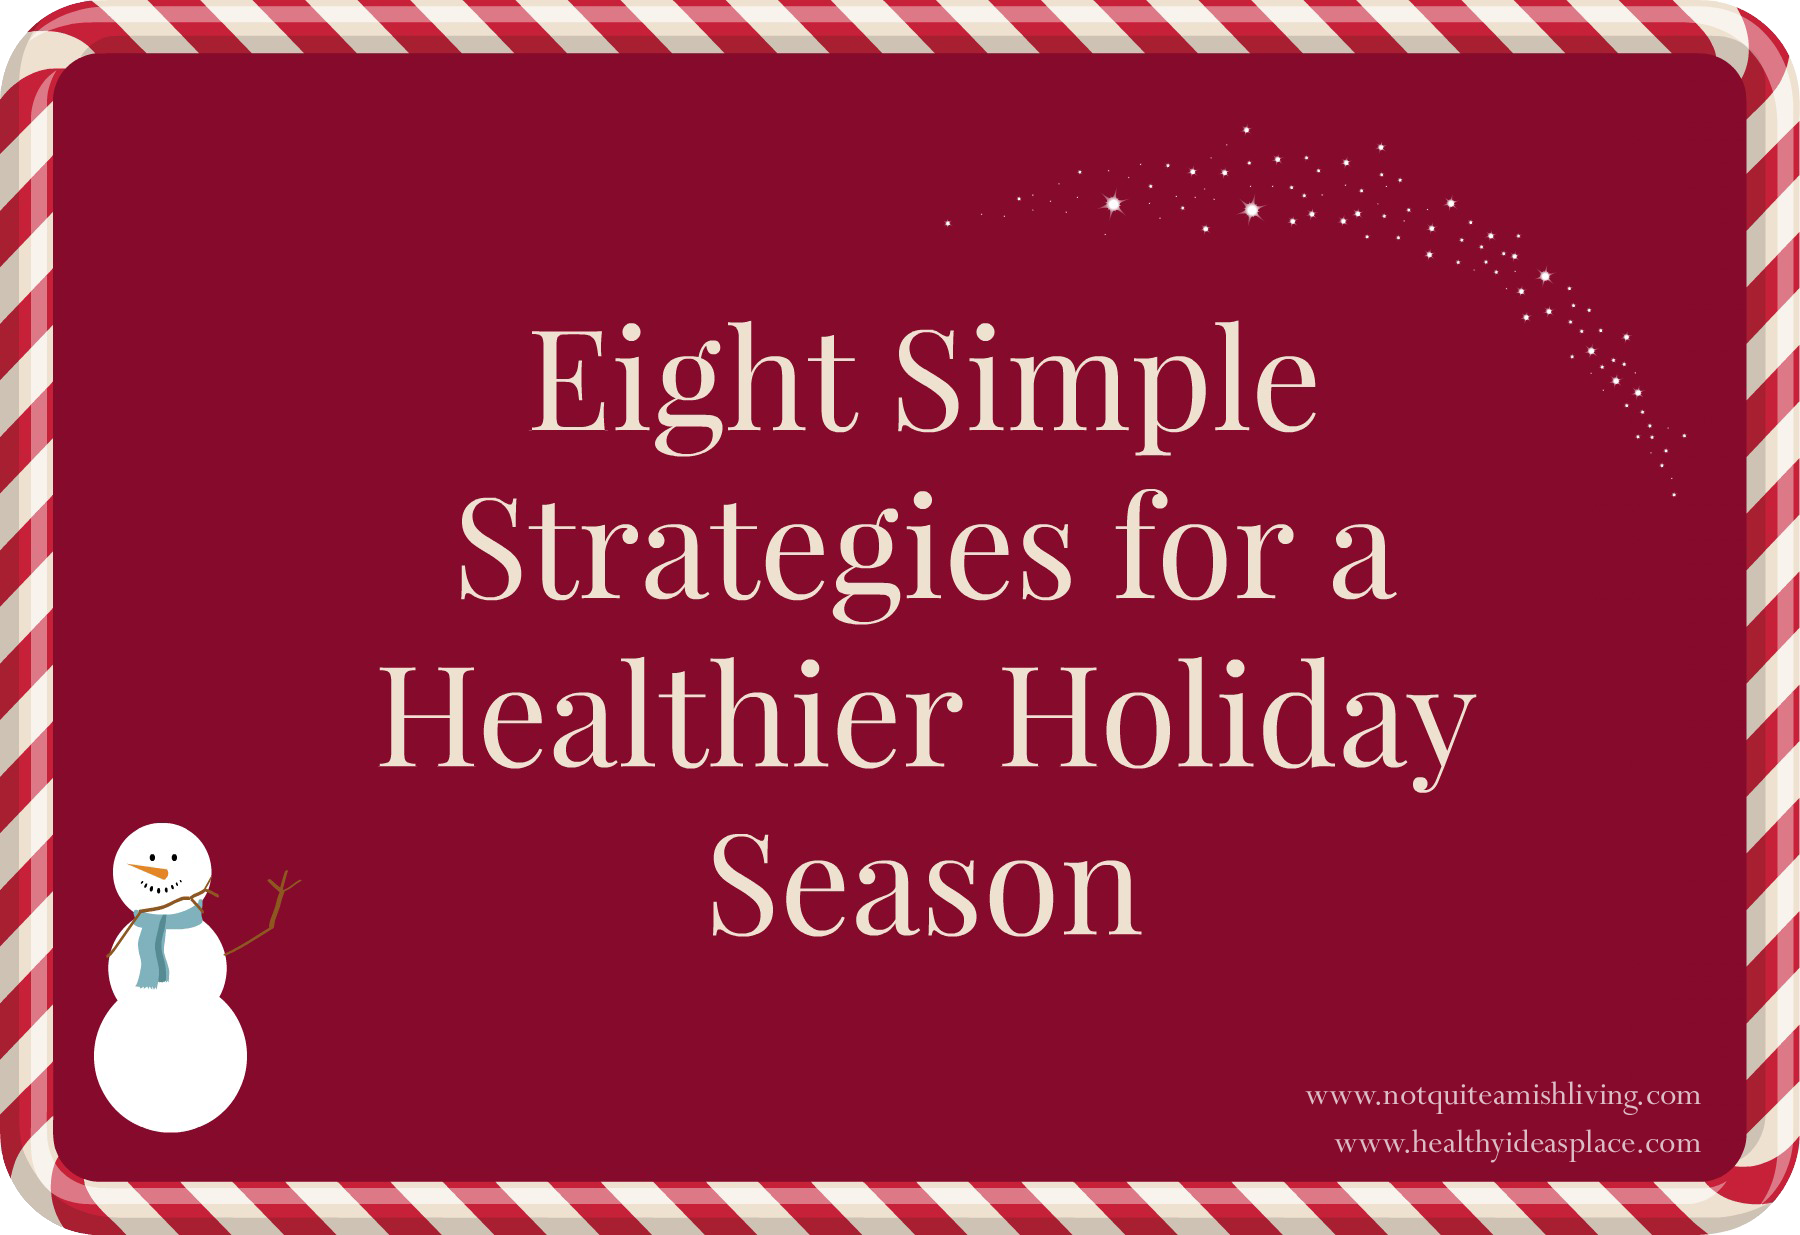 Strategies for a Healthier Holiday Season